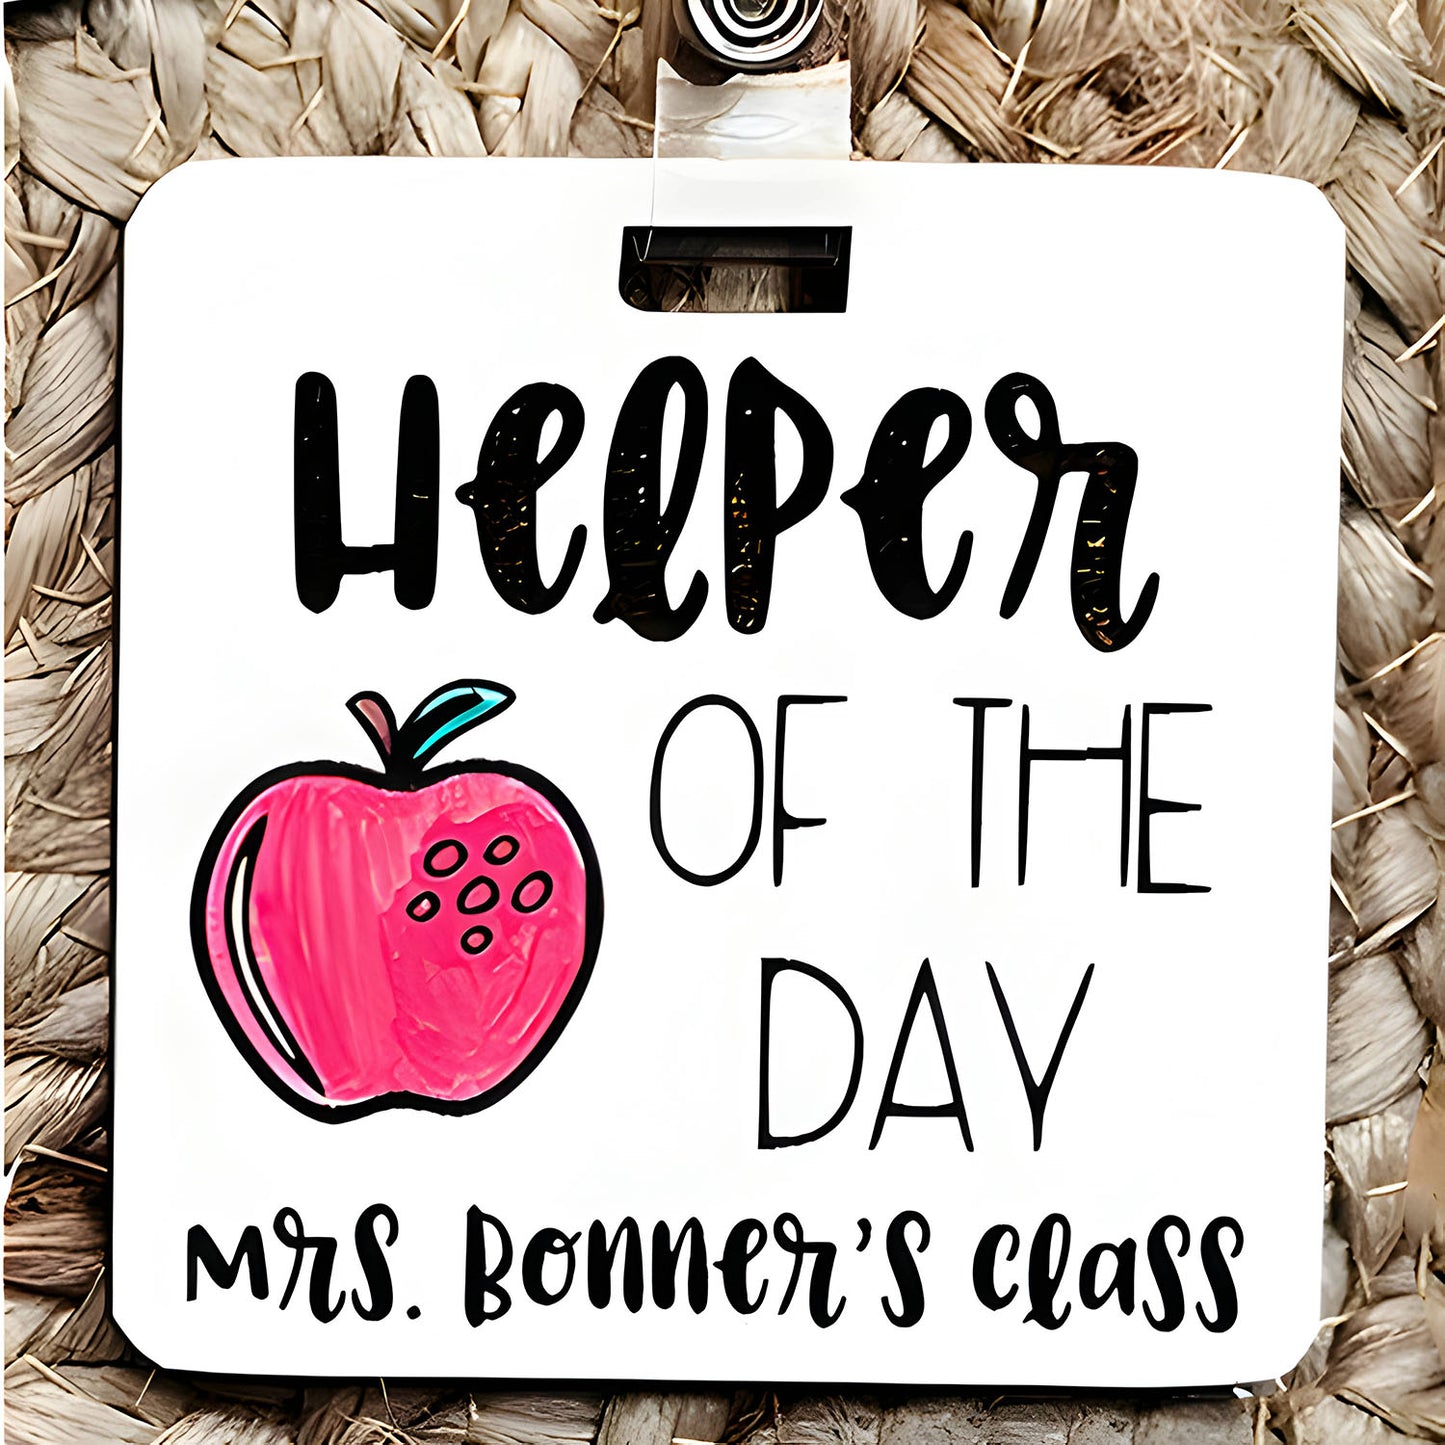 Personalized School Hall Pass - "Helper of the Day"